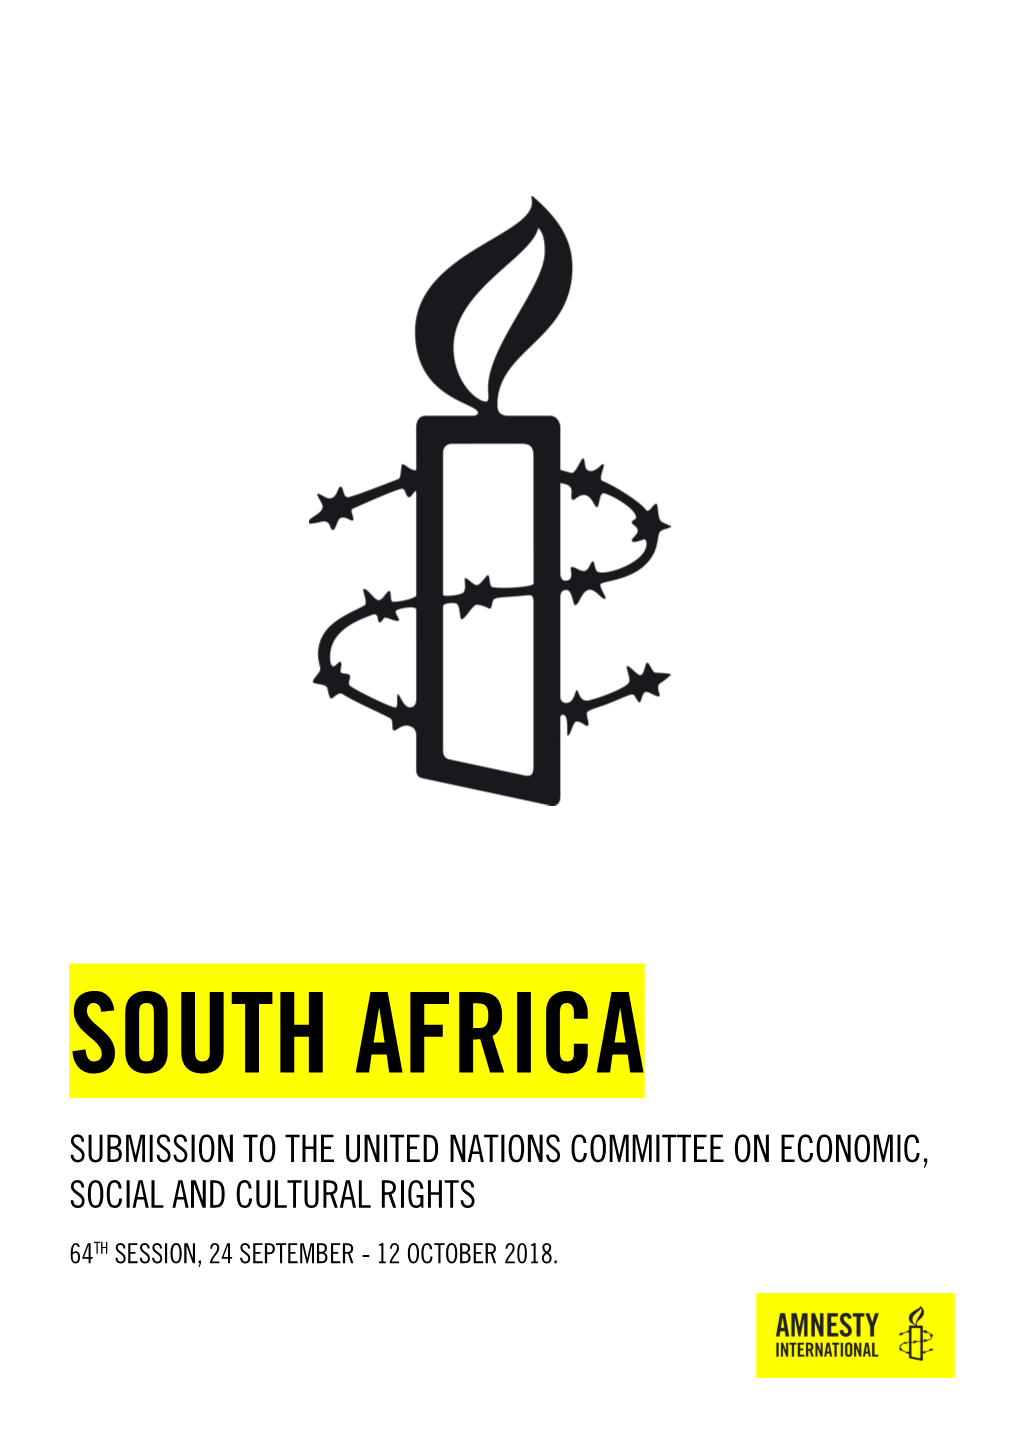 South Africa Submission to the United Nations Committee on Economic, Social and Cultural Rights 64Th Session, 24 September - 12 October 2018